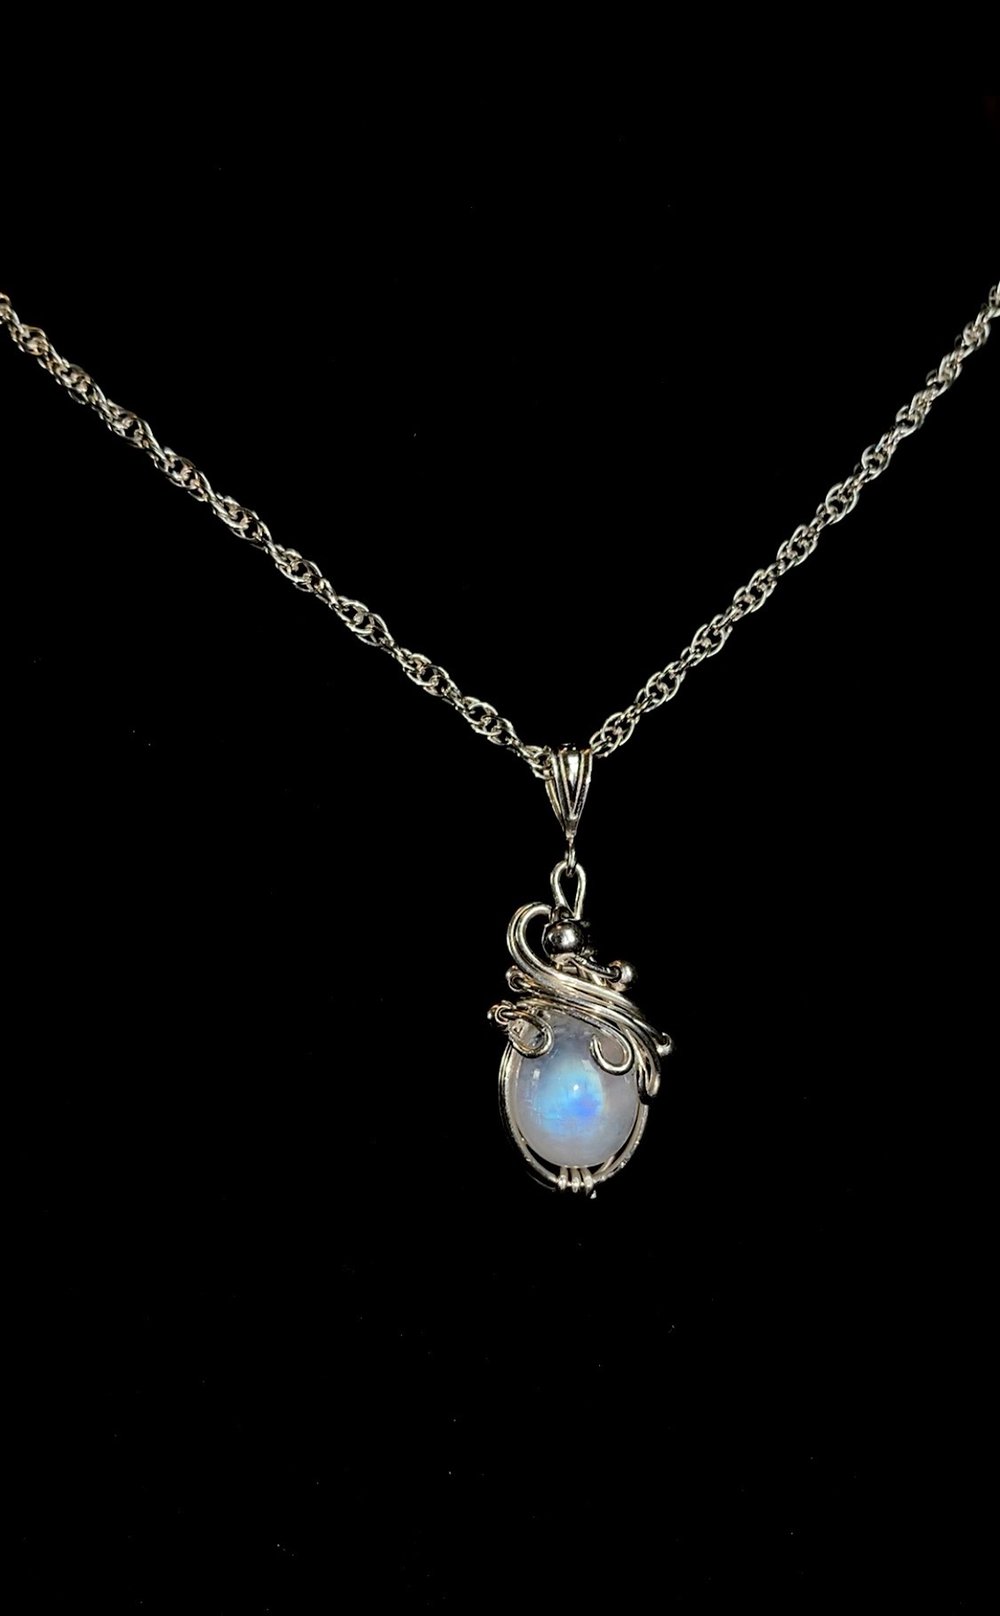 ⟢ Moonstone Necklace⟣